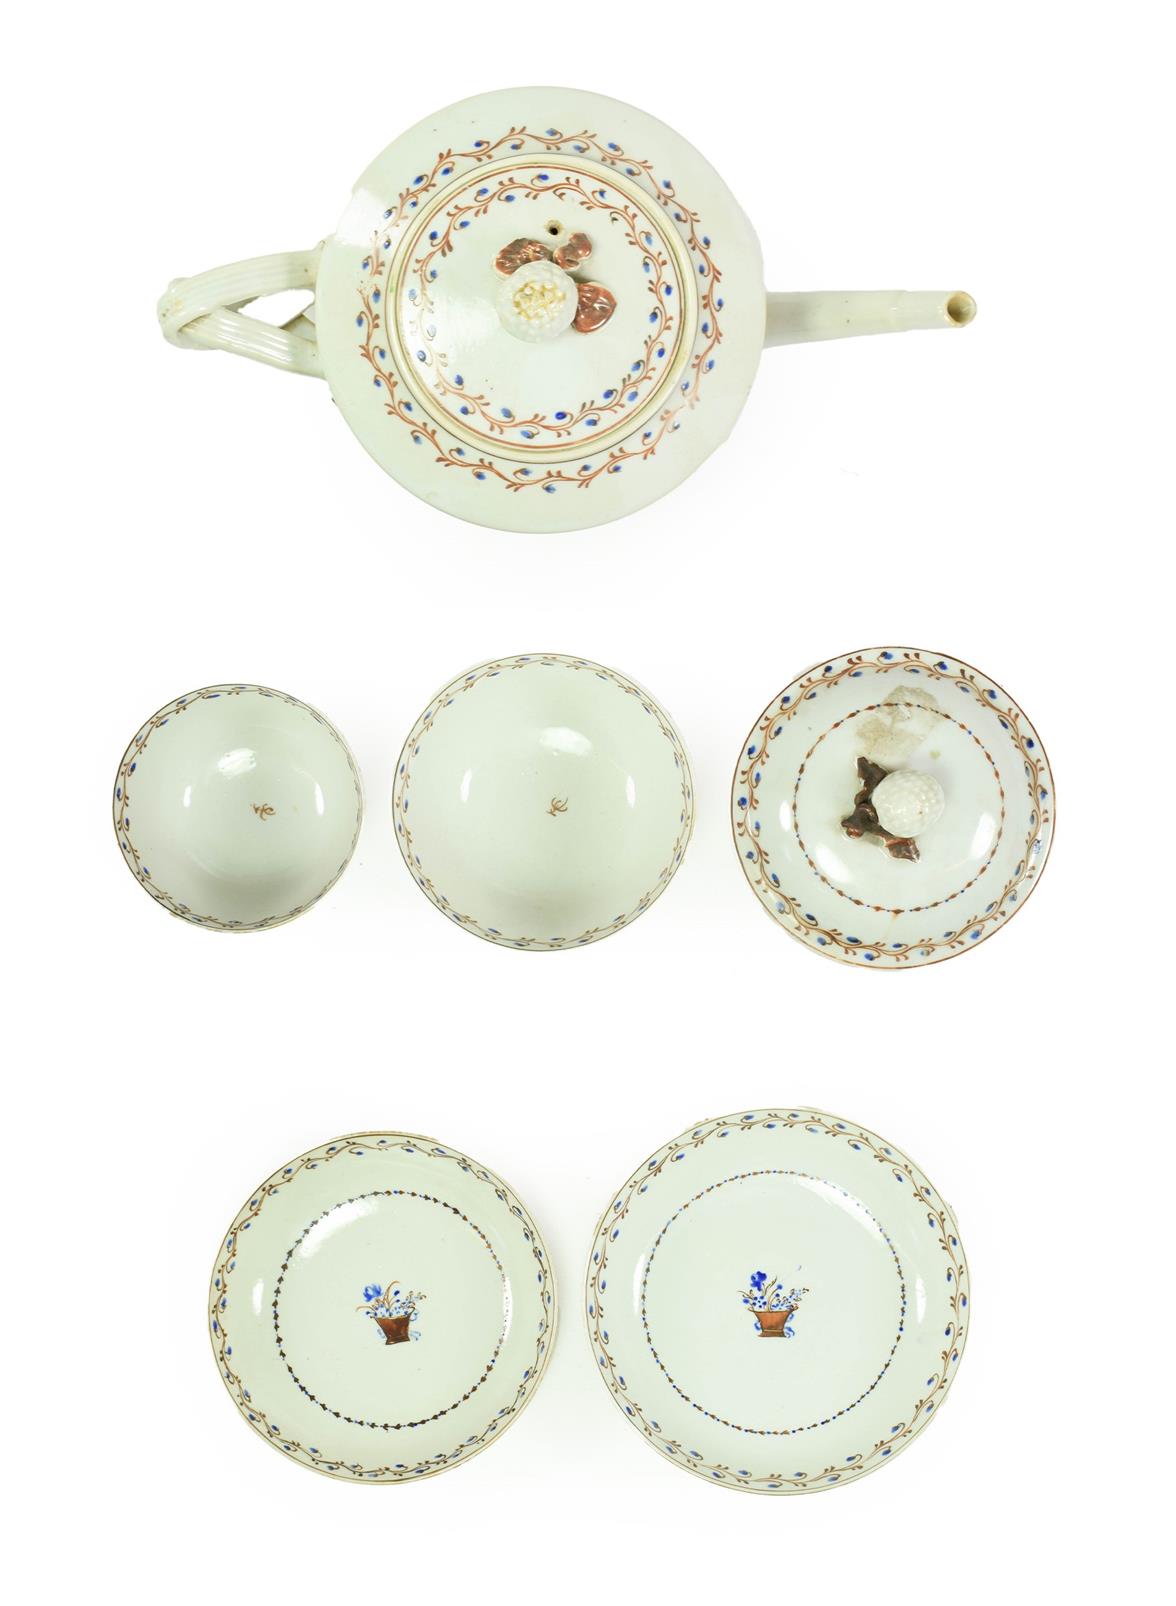 A Chinese Porcelain Tea Service, circa 1790, painted with a basket of flowers within a floral - Image 2 of 199